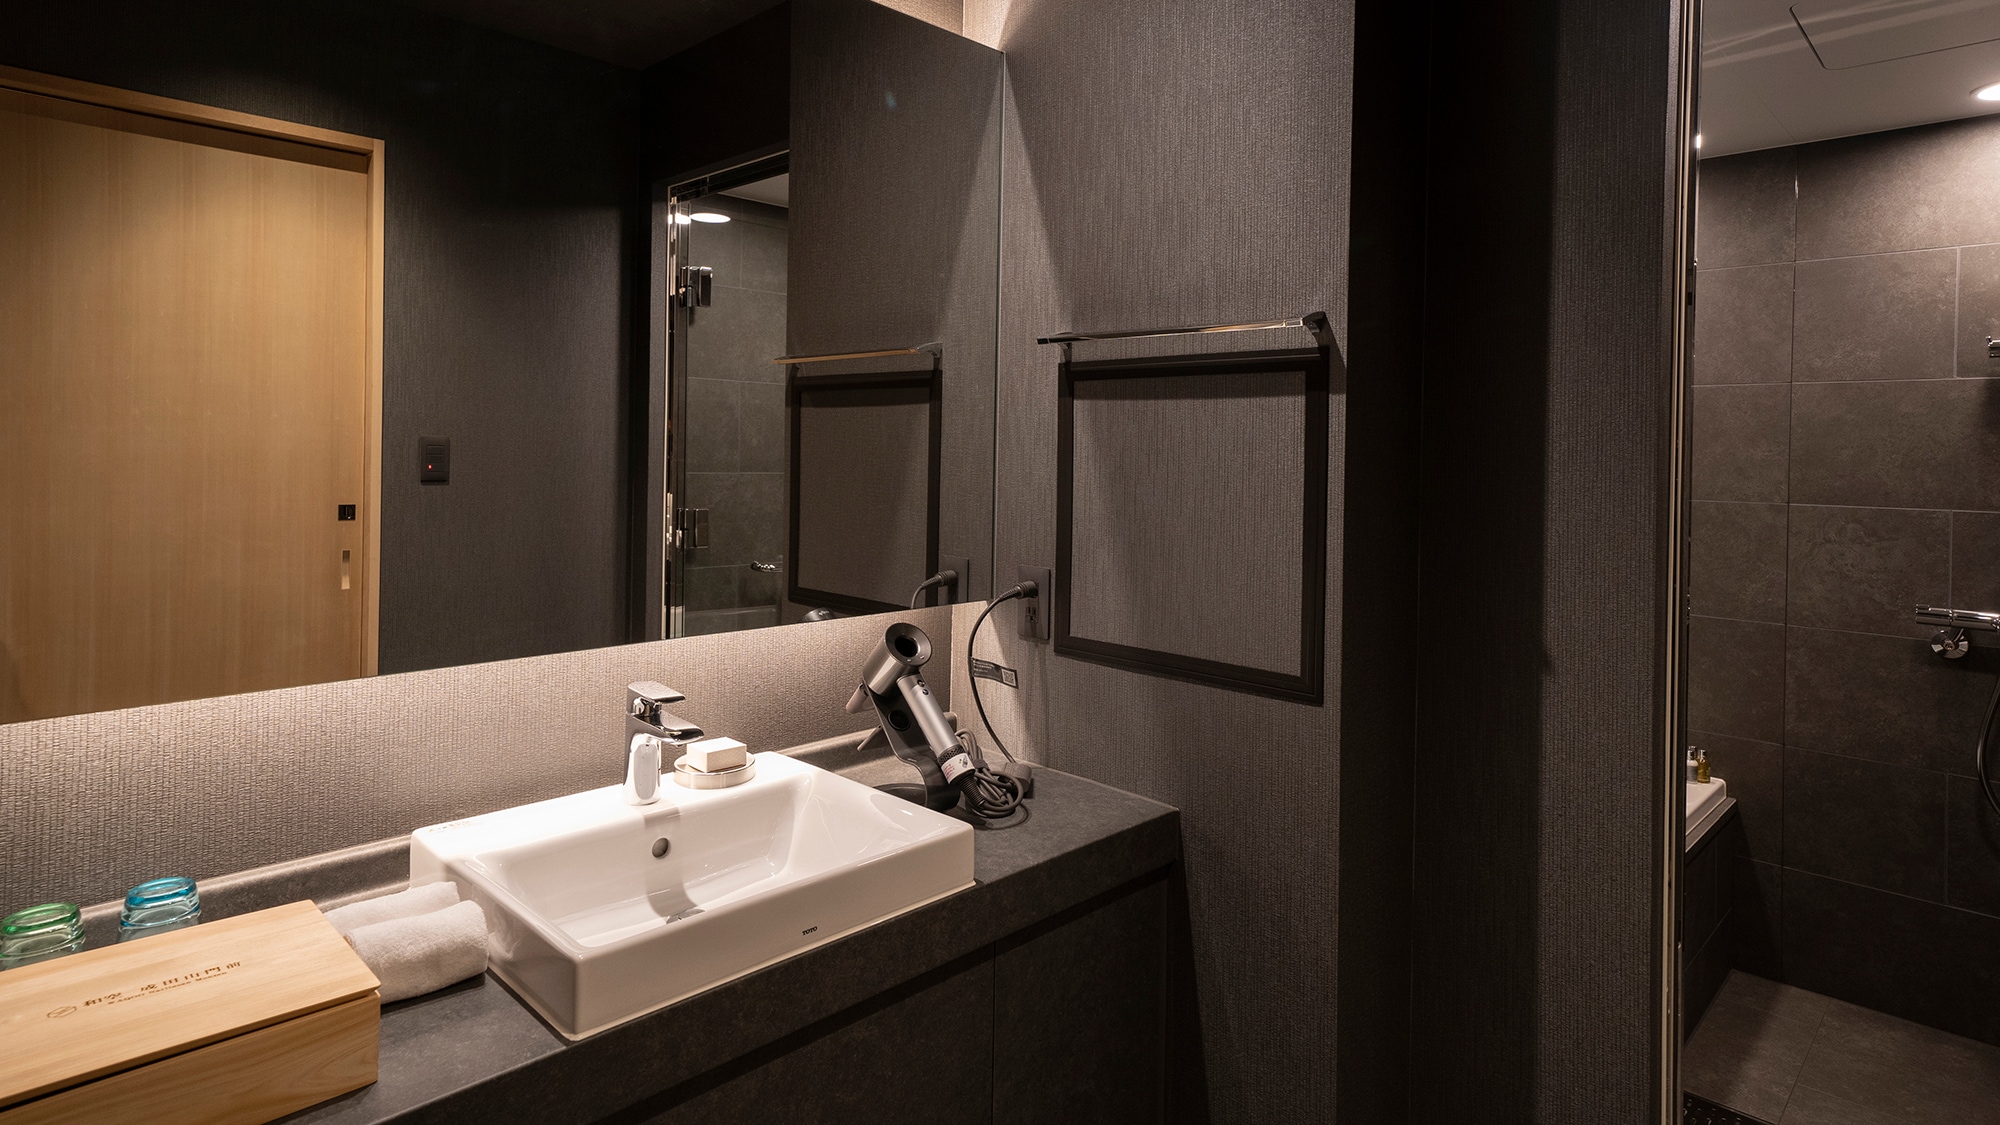 [Bathroom] A chic bathroom equipped with a Dyson hairdryer and high-quality toiletries